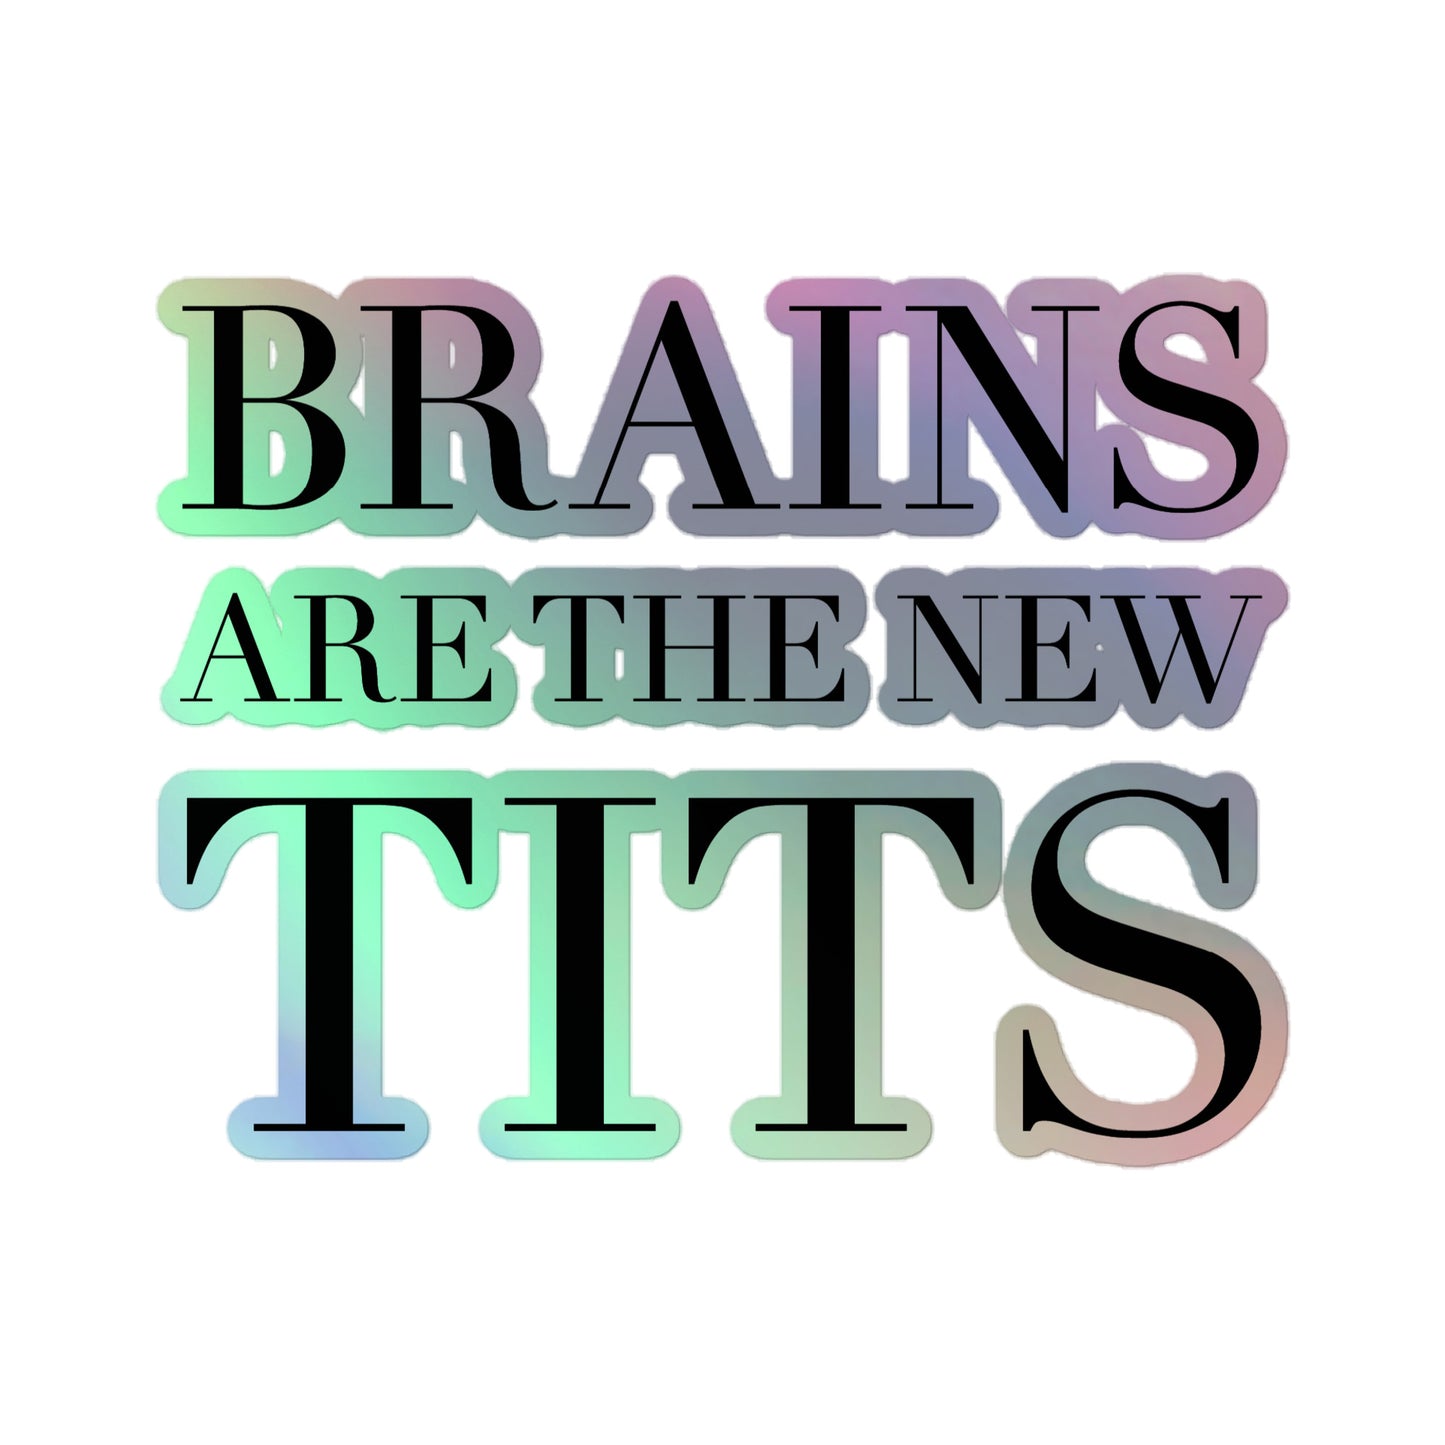 Brains are the new tits Holographic stickers